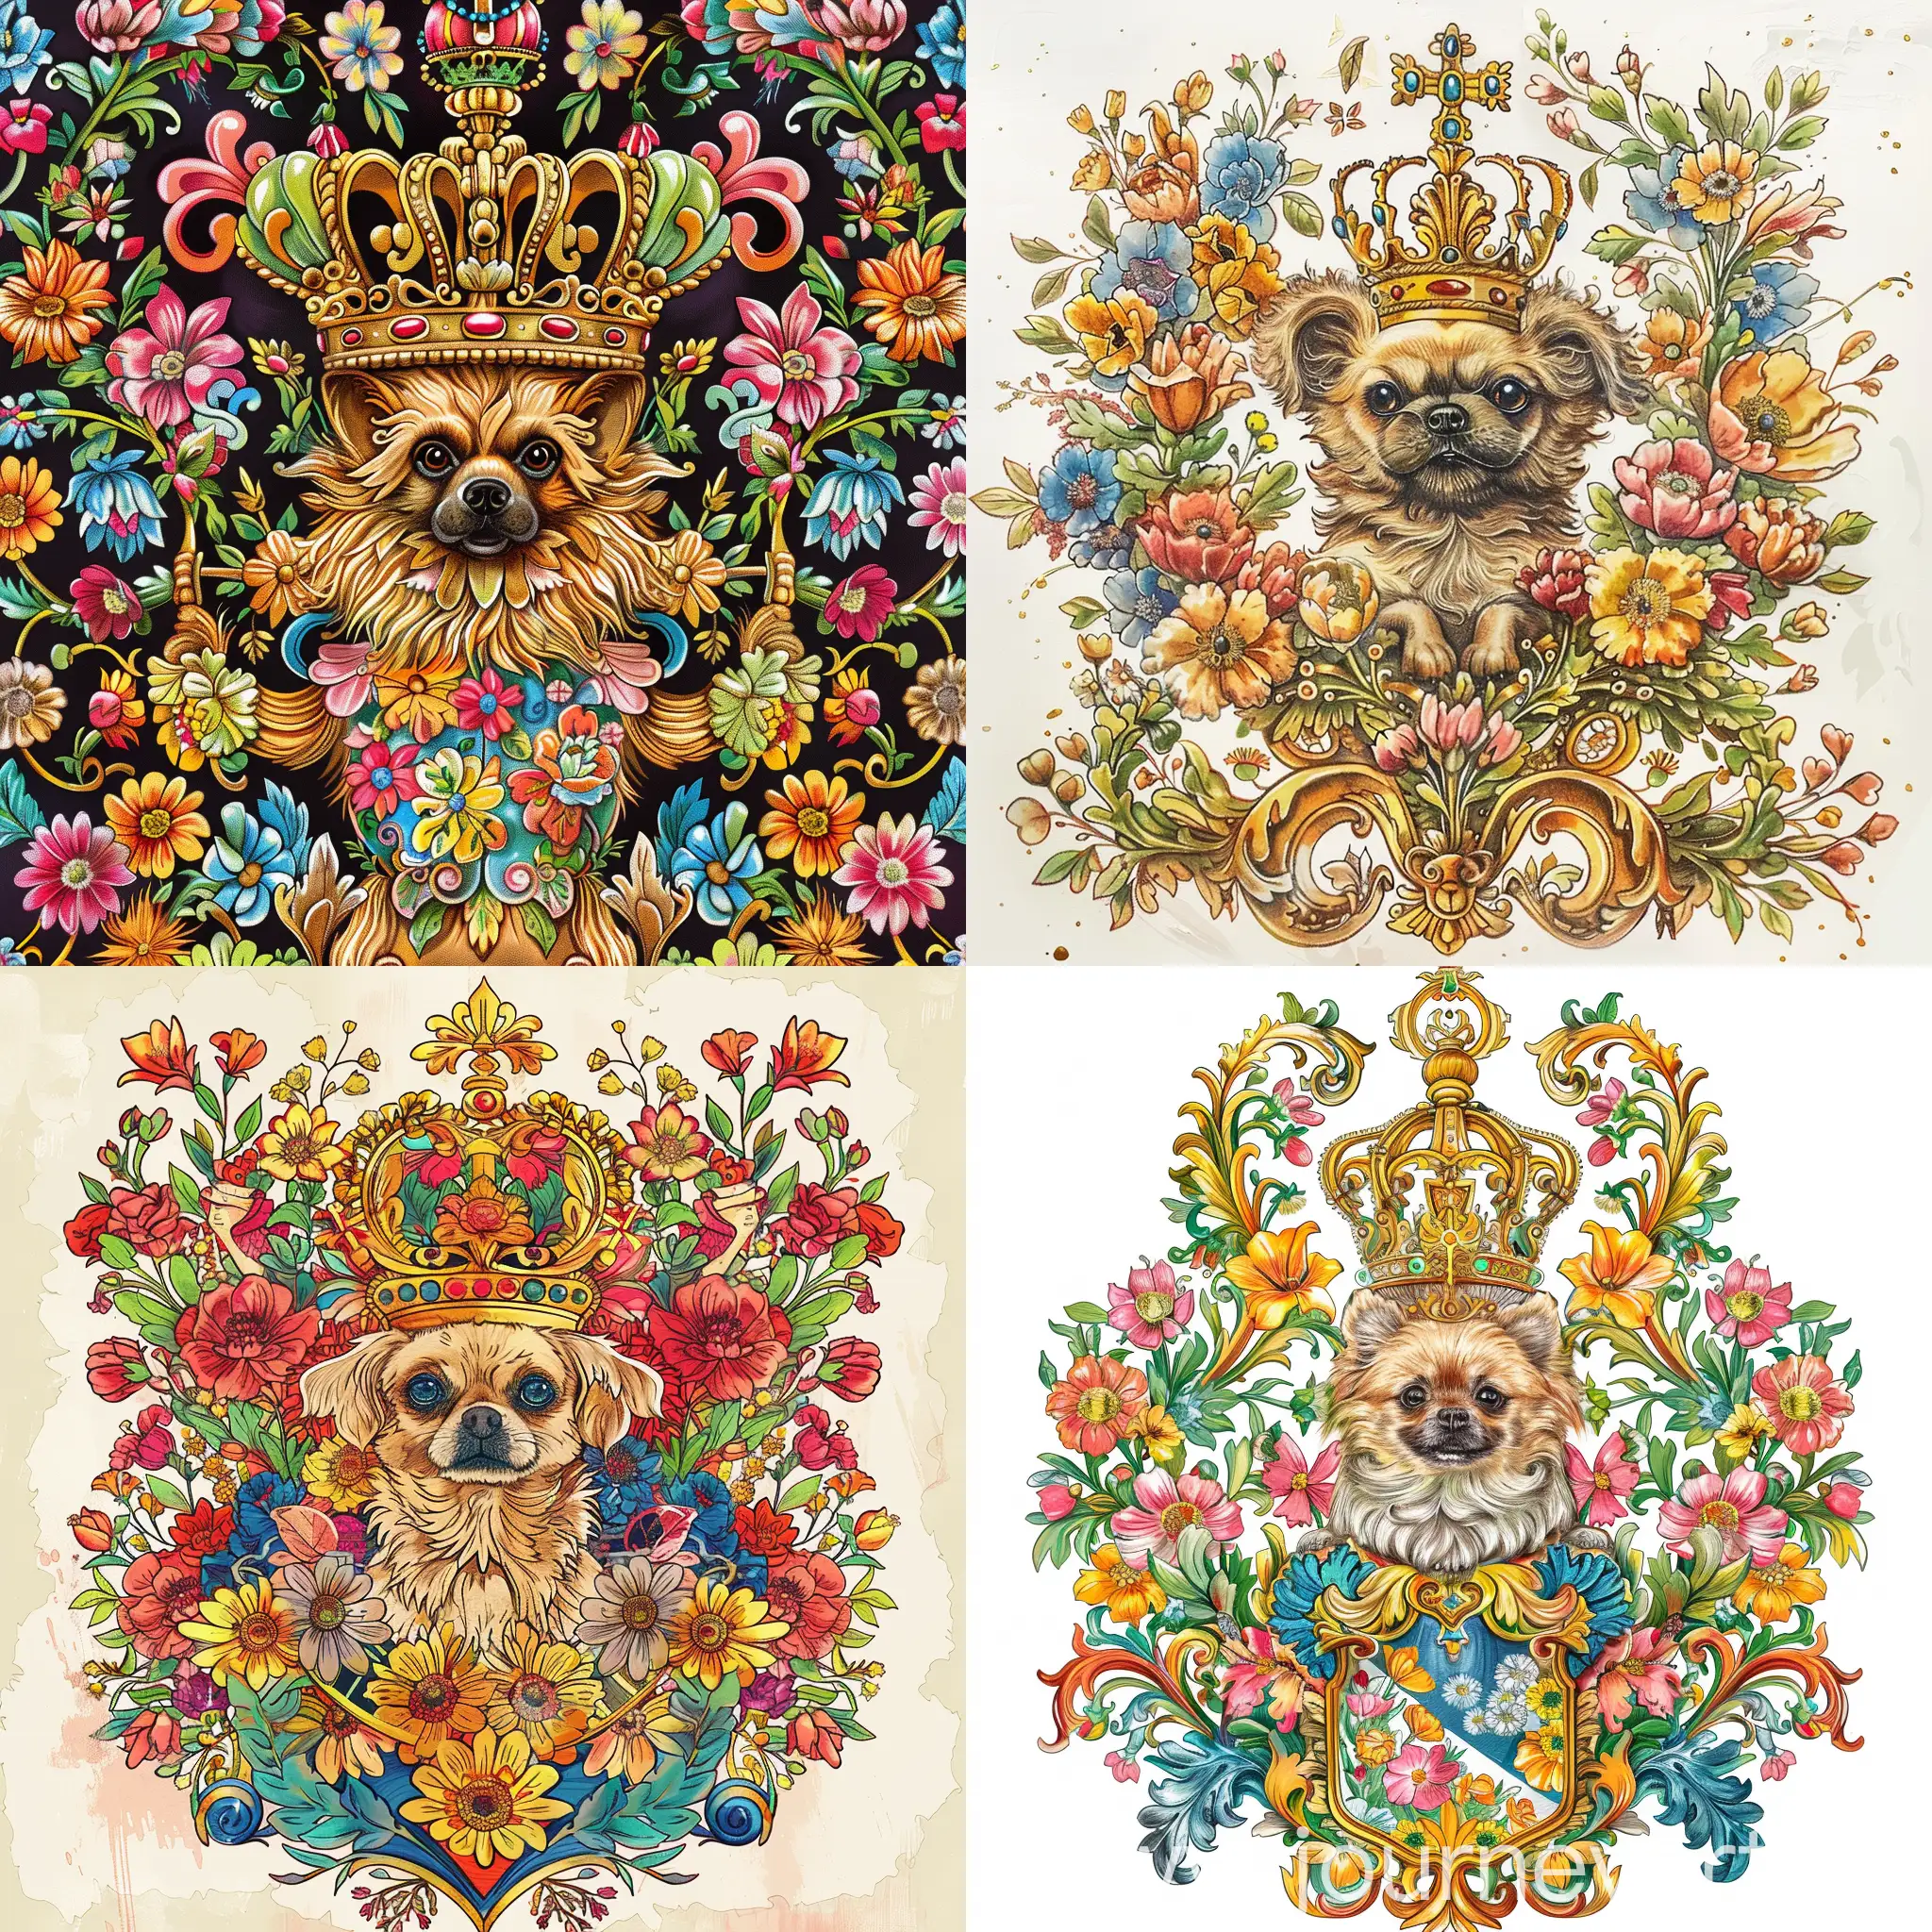 Russian-Style-Coat-of-Arms-with-Pekingese-Dog-and-Golden-Crown-Surrounded-by-Flowers